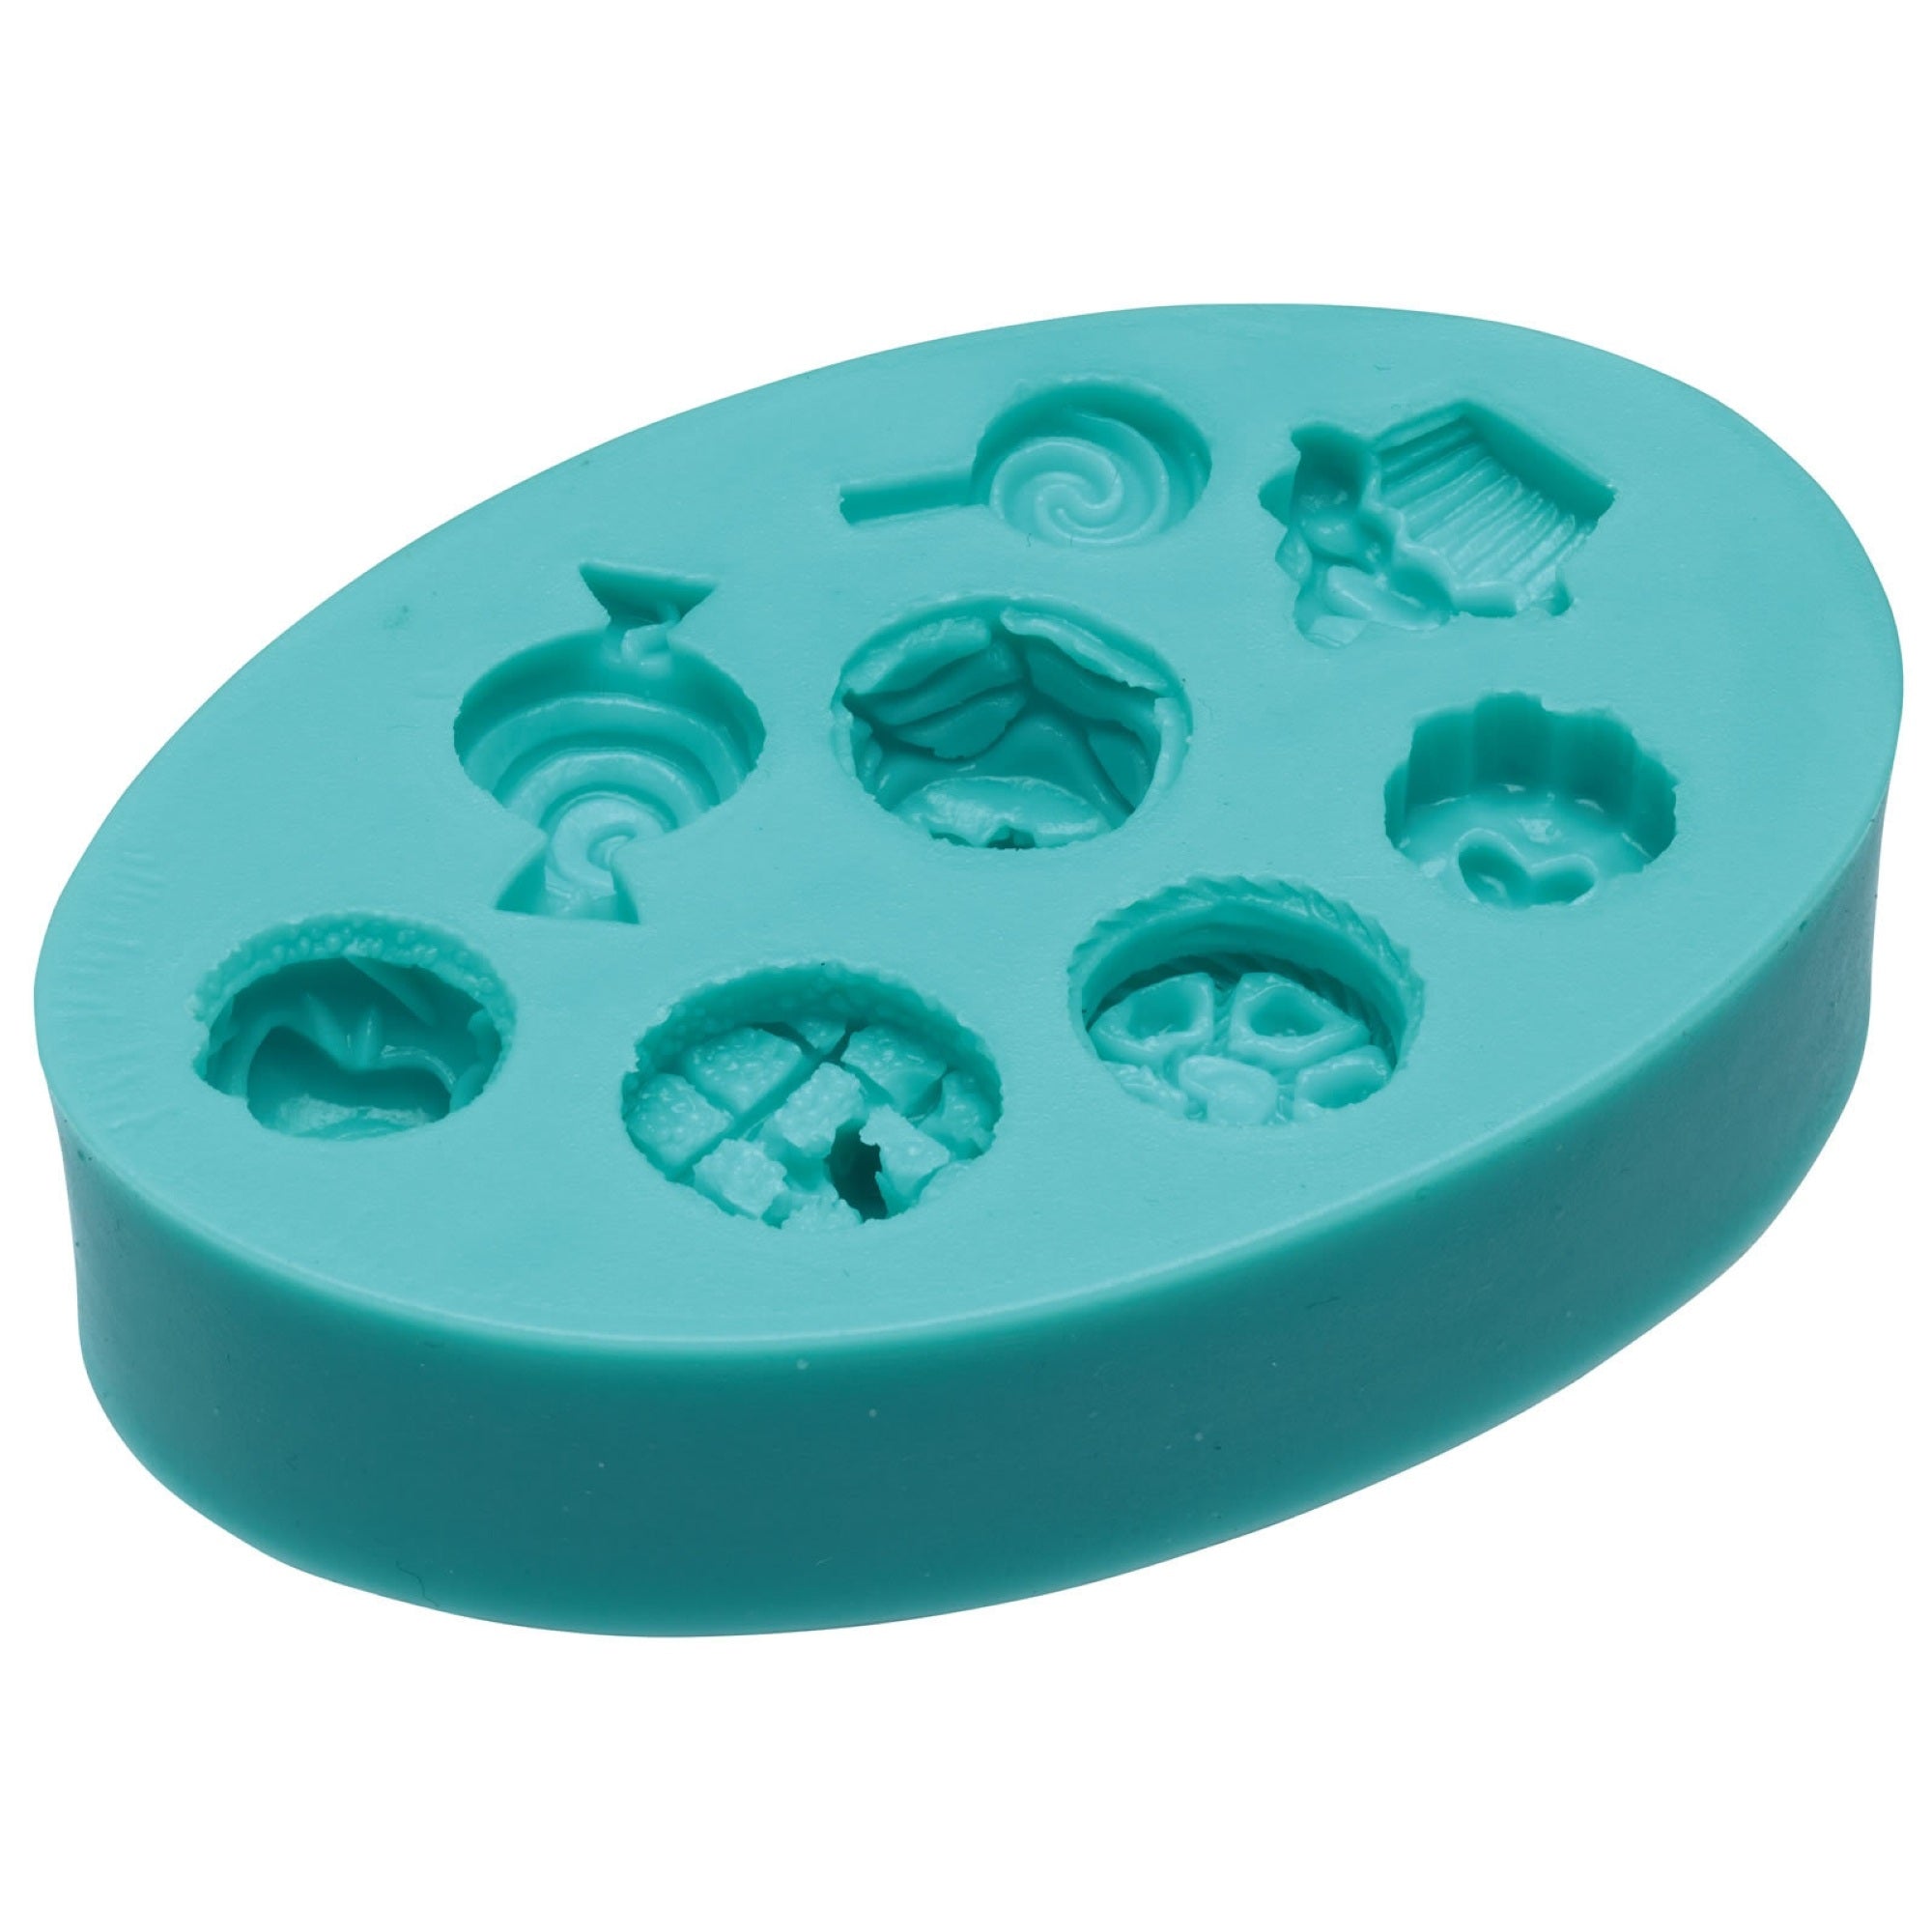 Sweetly Does It Sweets Silicone Fondant Mould - The Cooks Cupboard Ltd